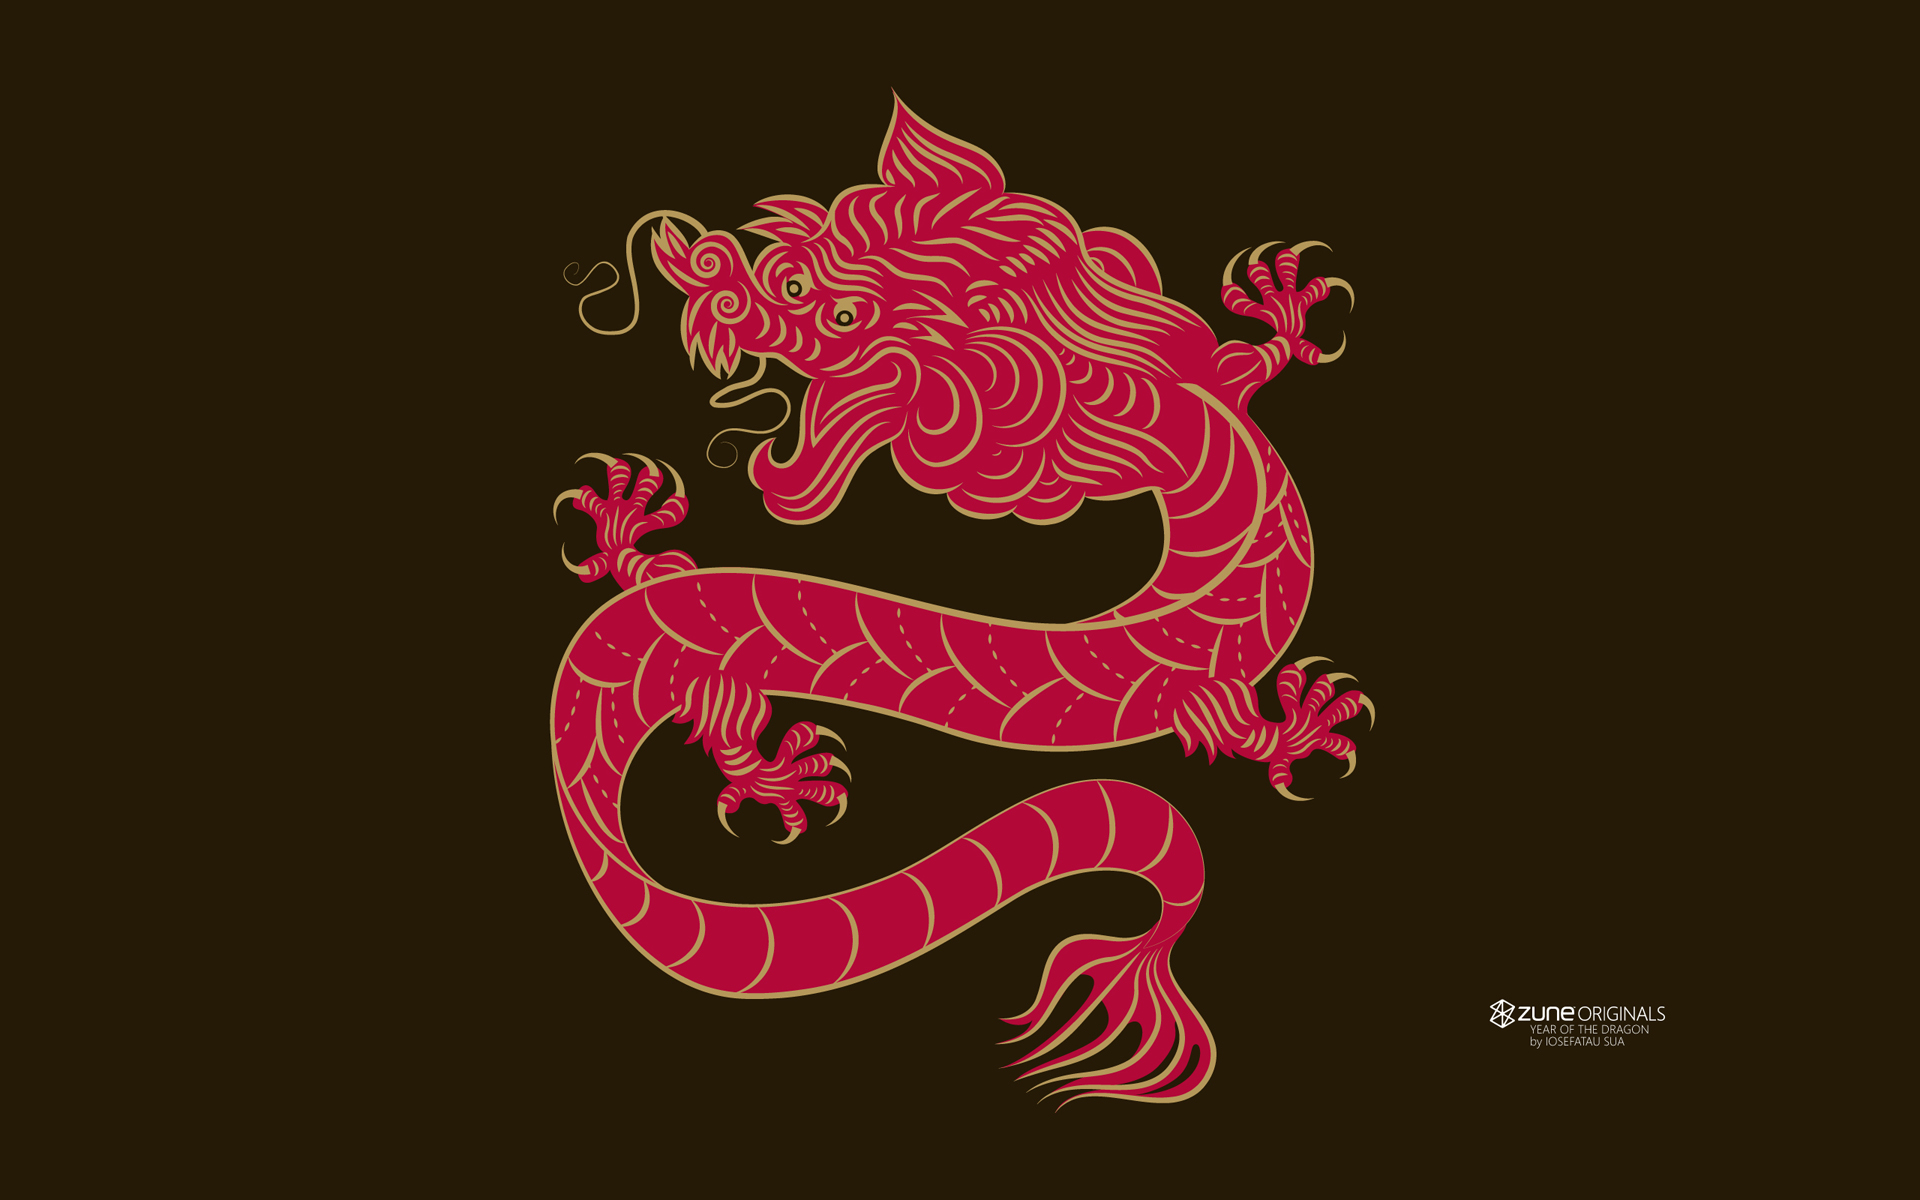 products, zune, dragon, year of the dragon, zodiac